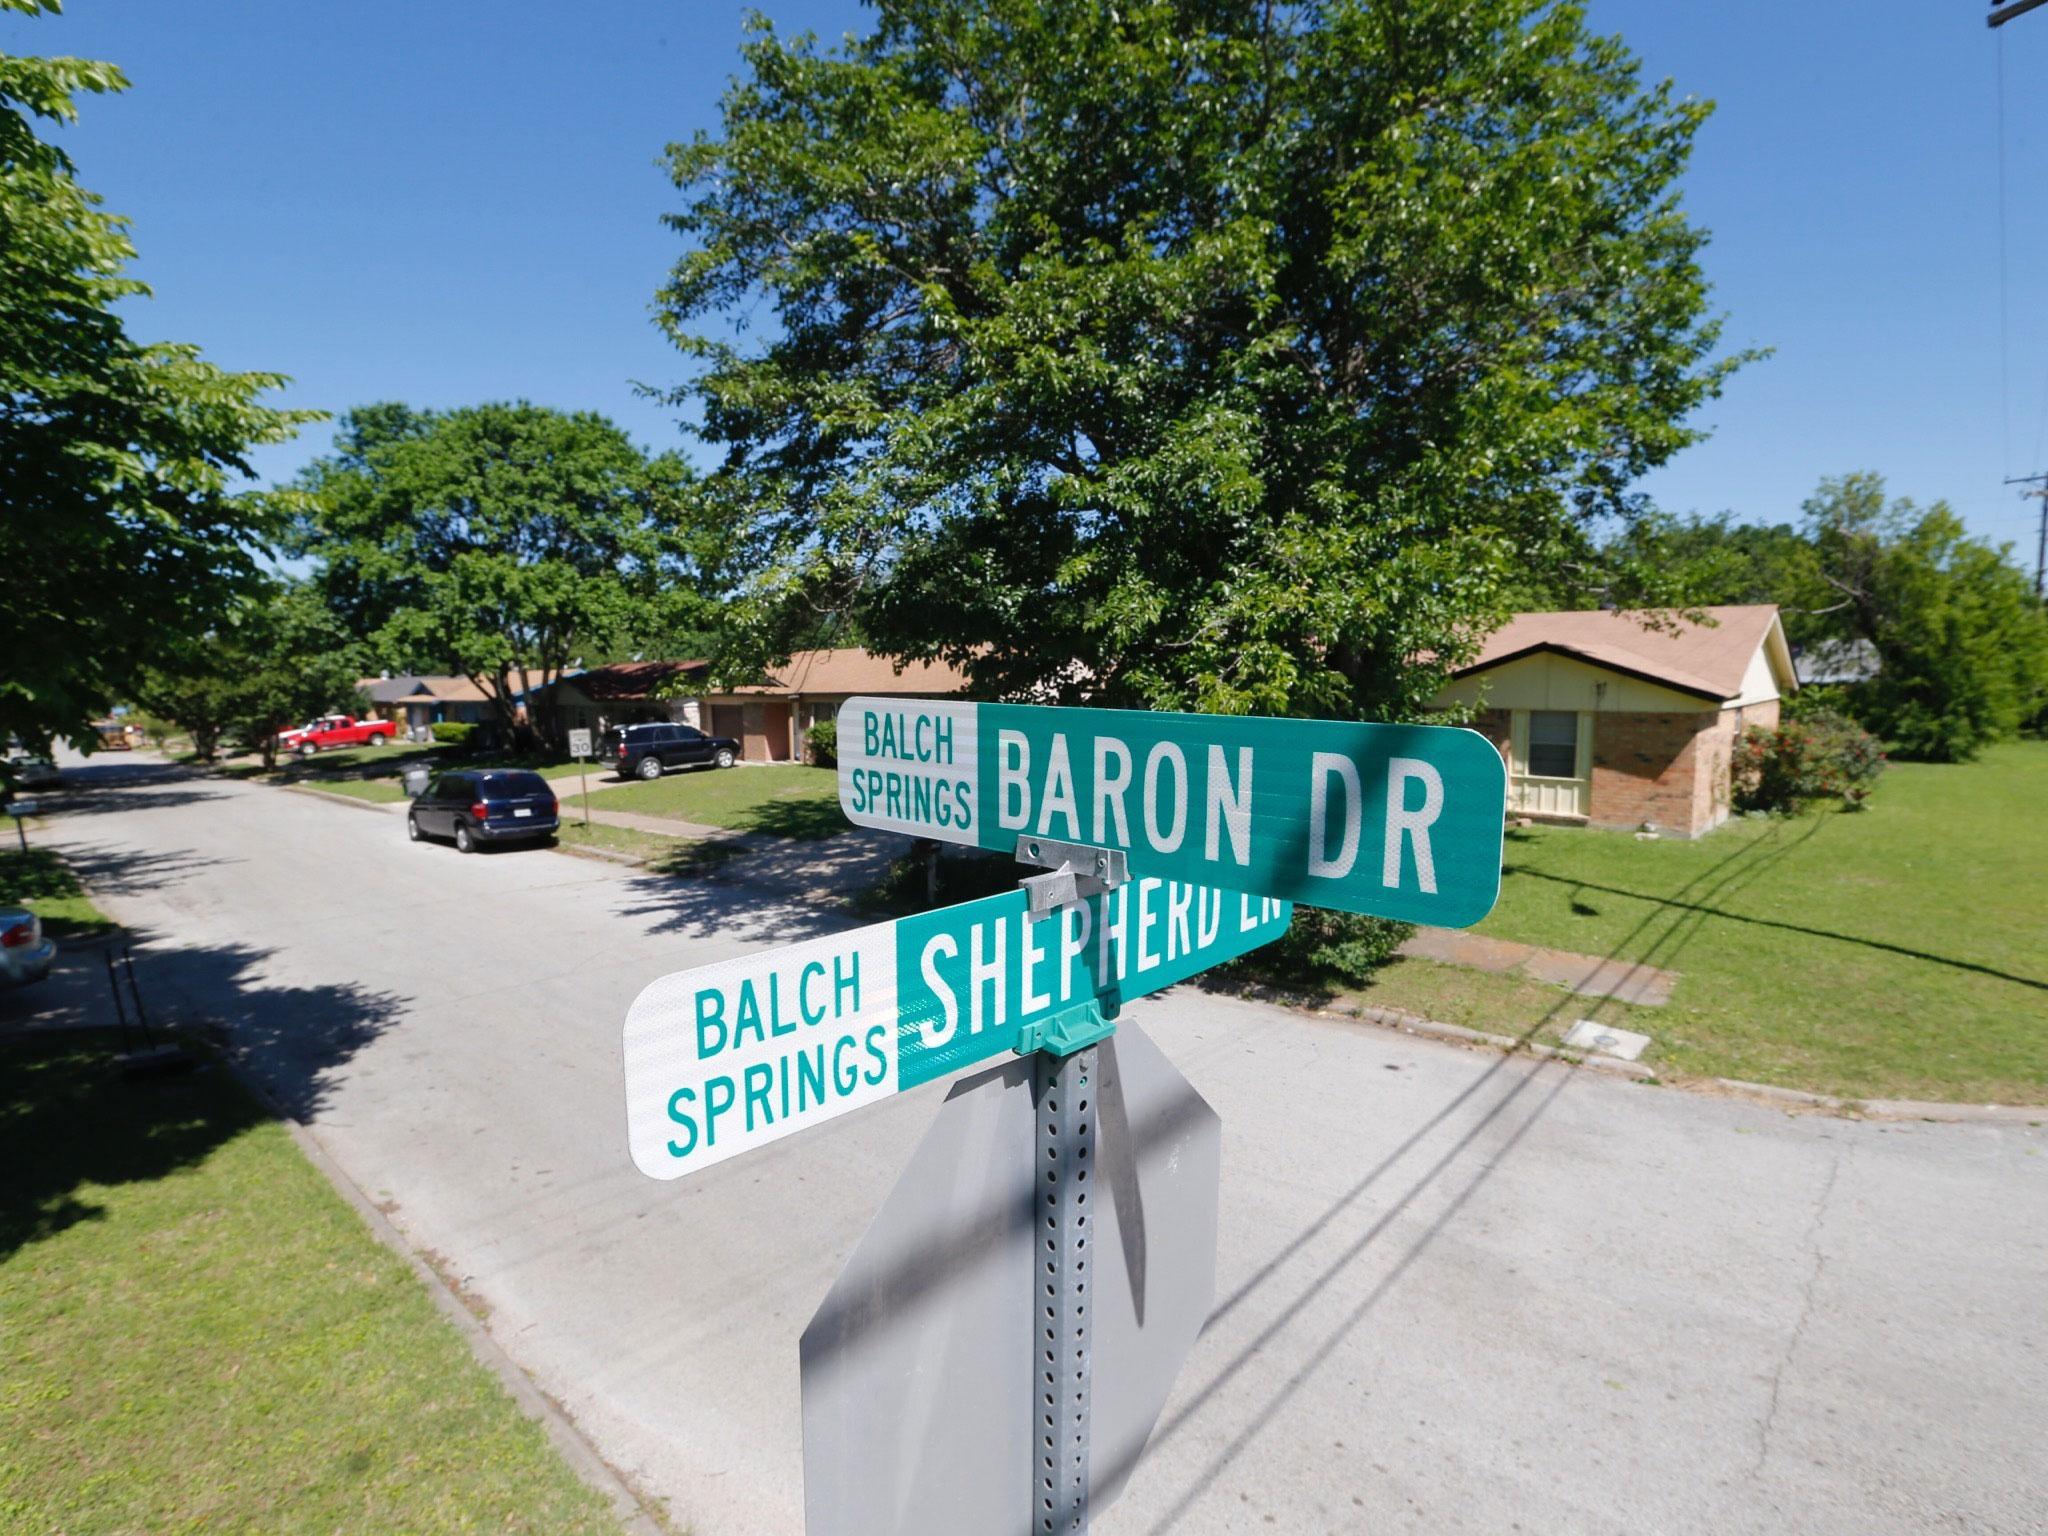 The intersection of Baron and Shepherd Lane near where the shooting of Jordan Edwards by a police officer happened in Balch Springs, Texas